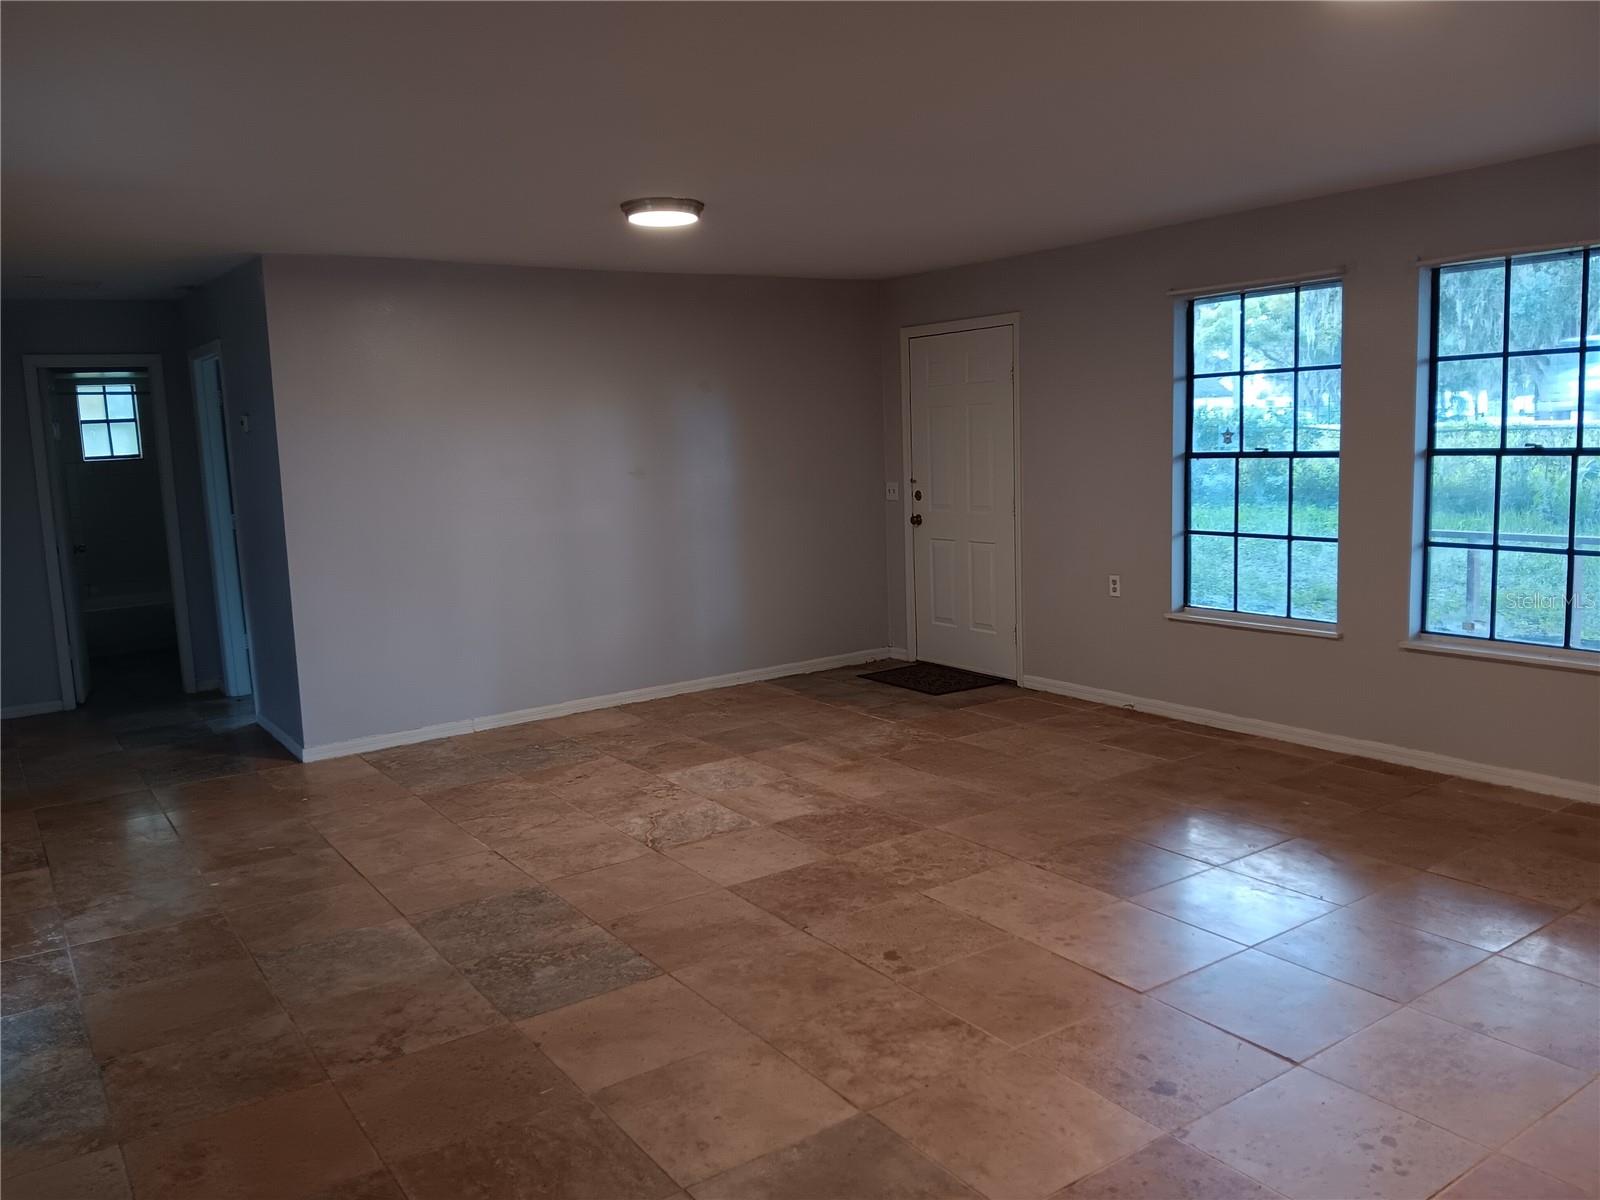 living room with expensive travertine flooring